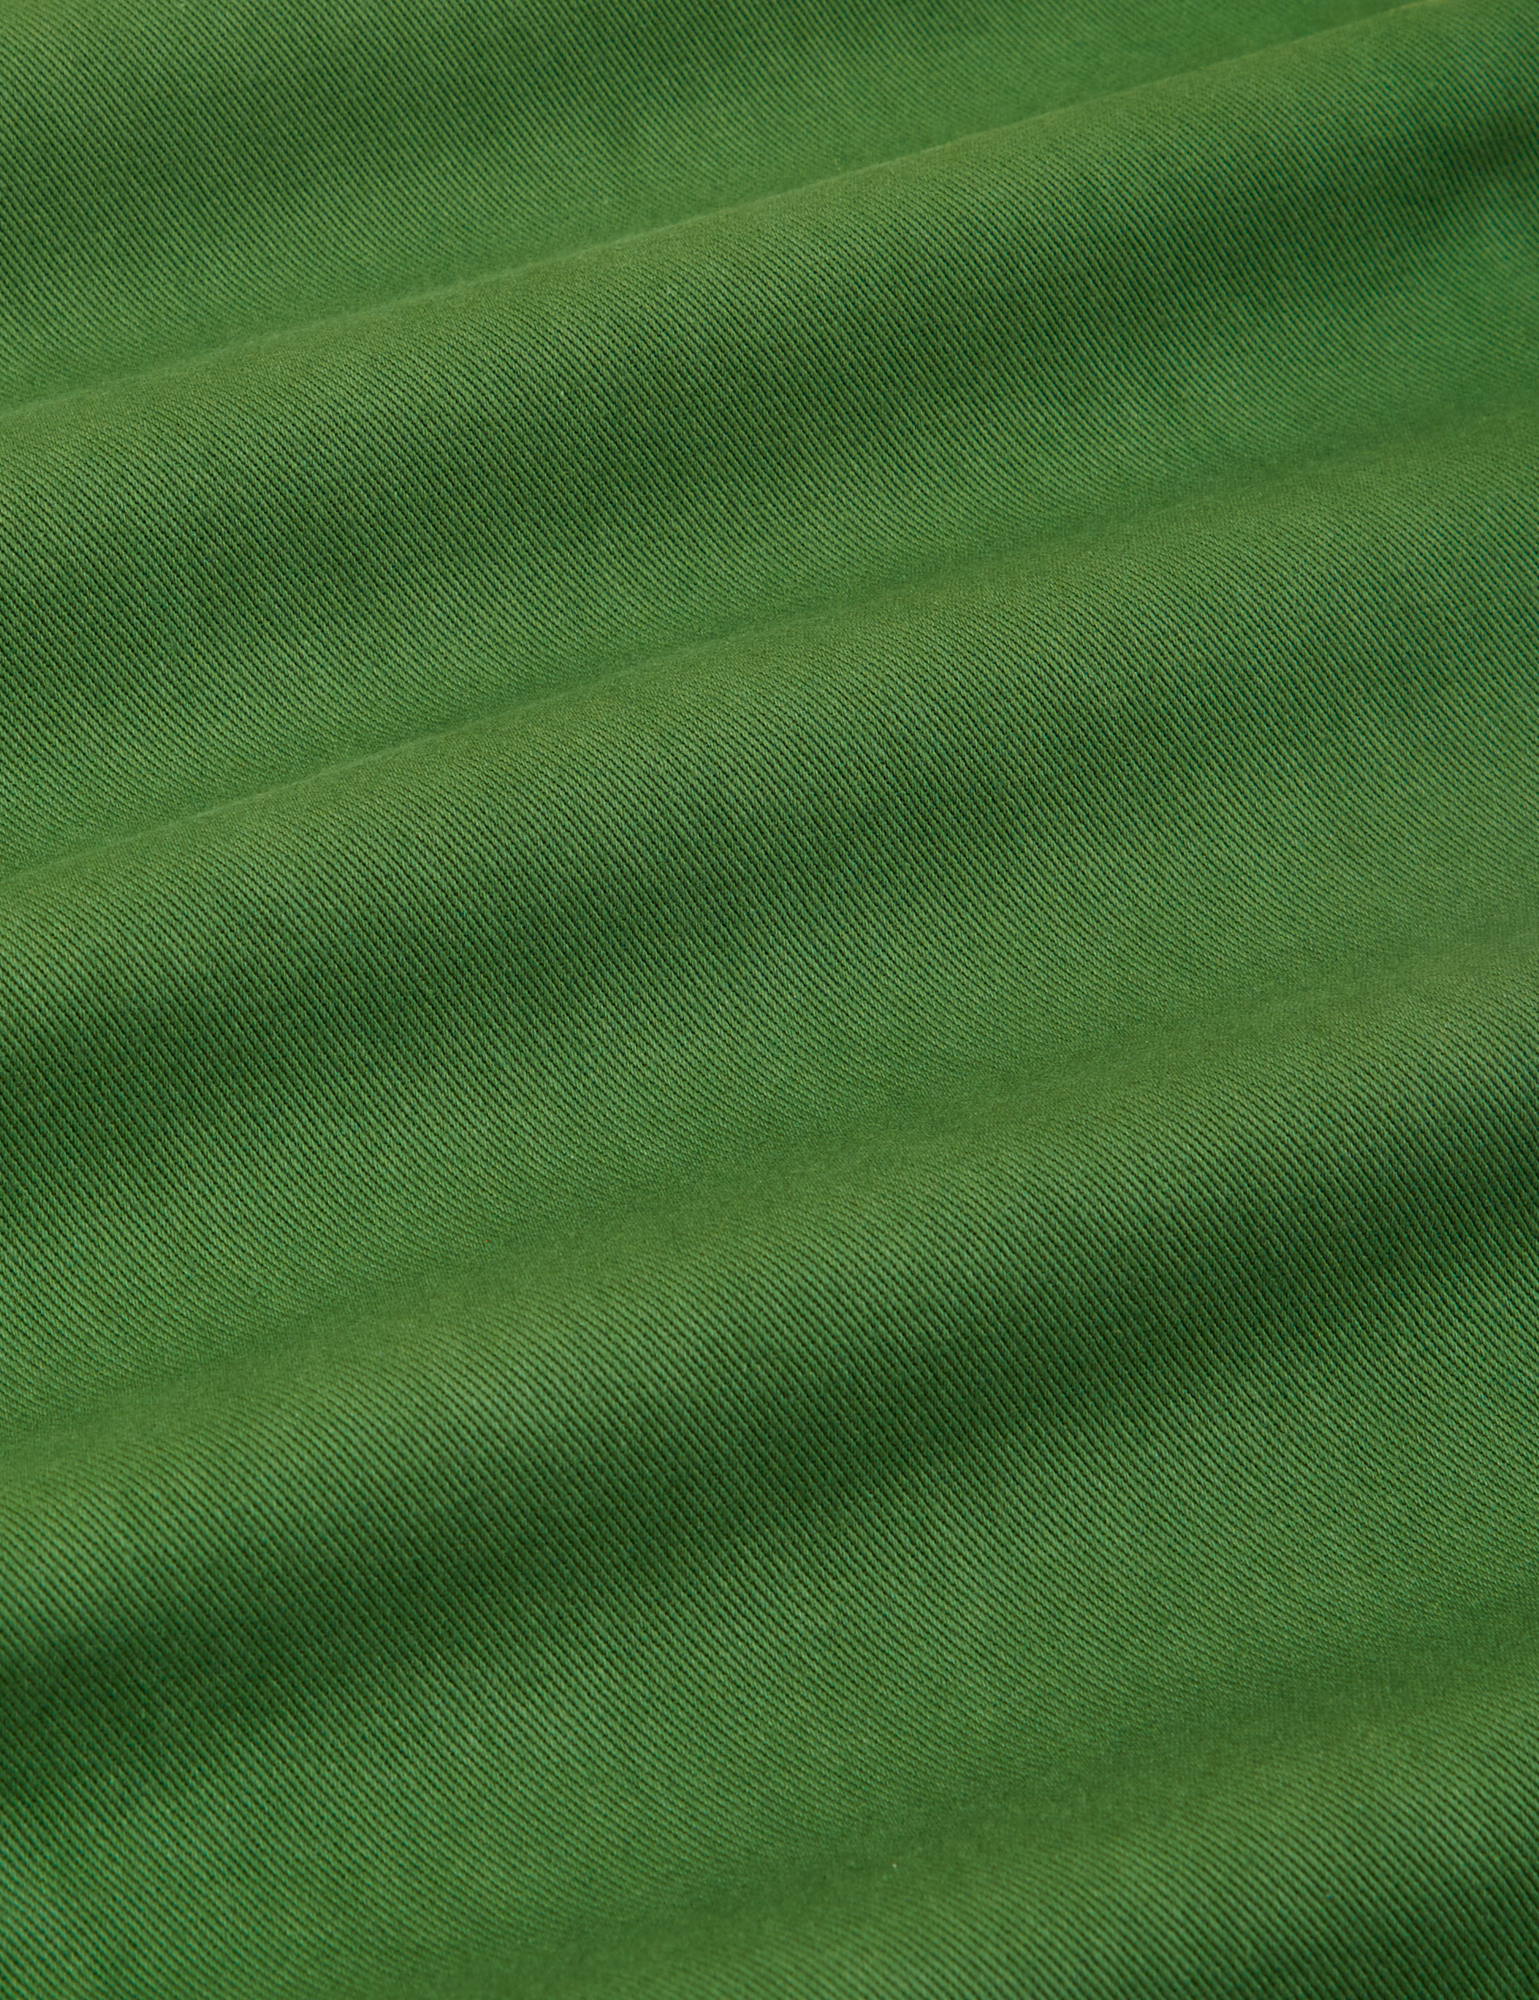 Heavyweight Trousers in Lawn Green fabric detail close up